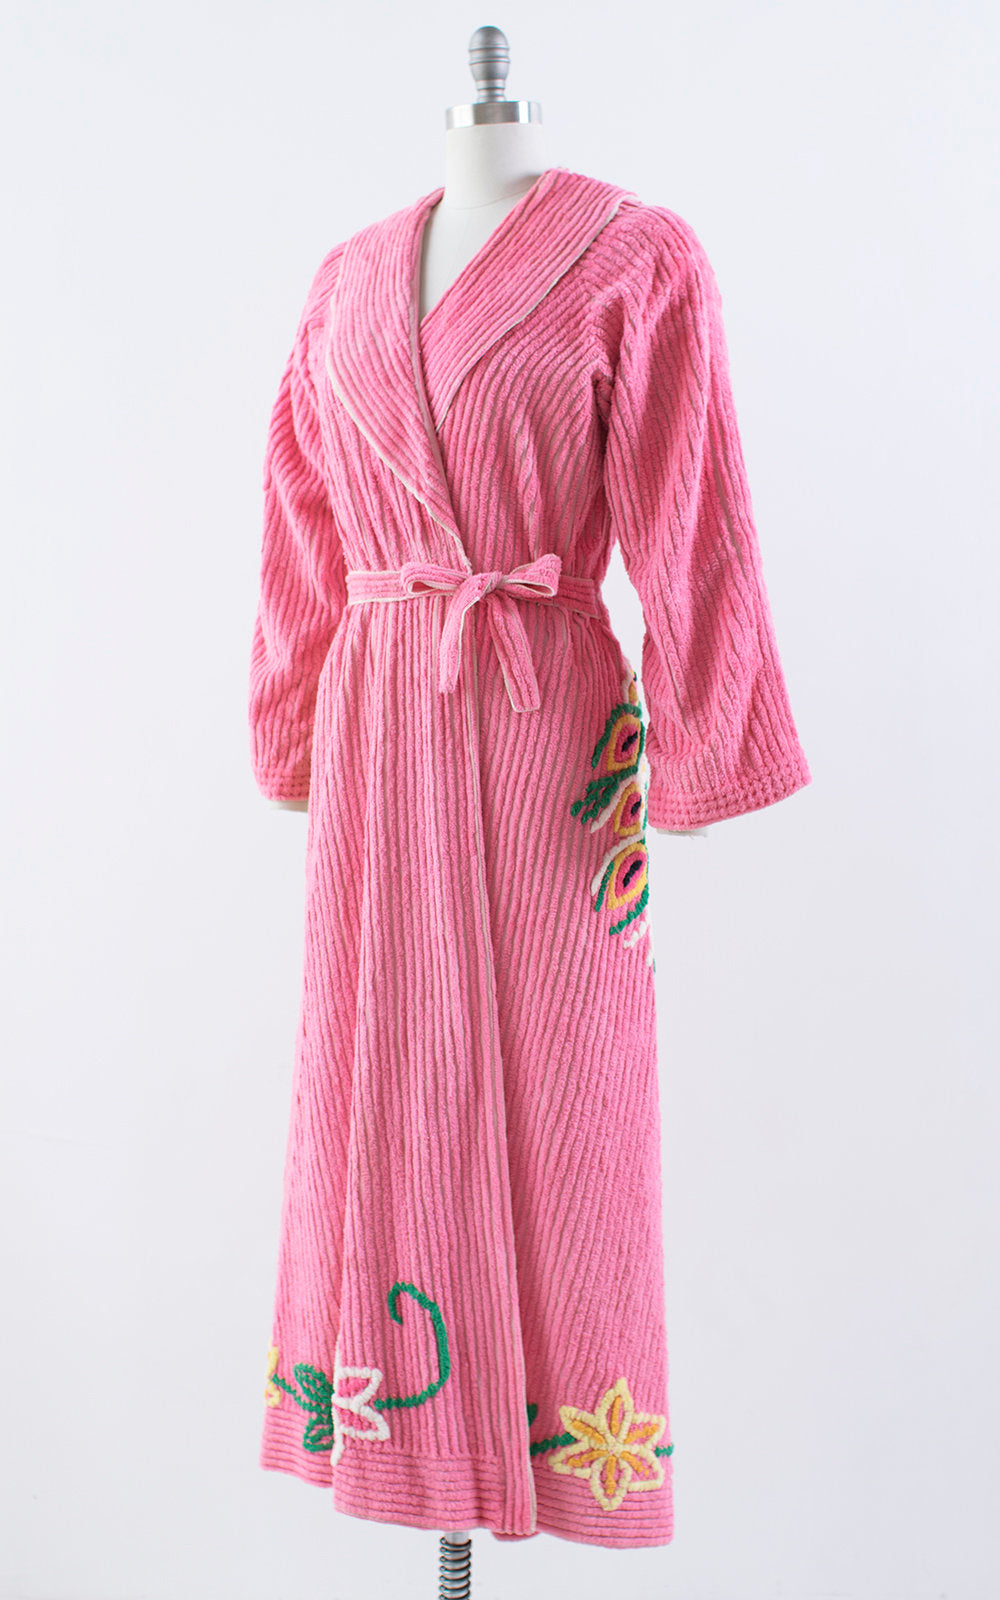 Vintage 1940s 1950s Robe | 40s 50s Chenille Peacock Novelty Print Pink Floral Loungewear Robe (small/medium)